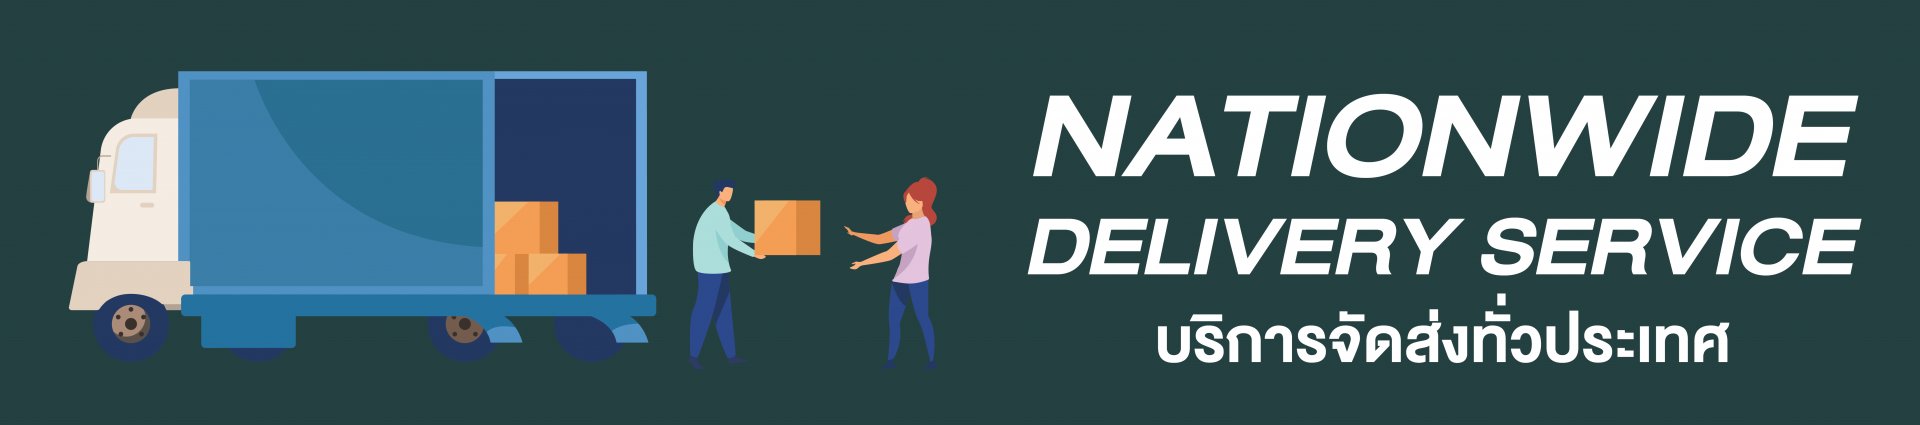 head nationwide delivery service